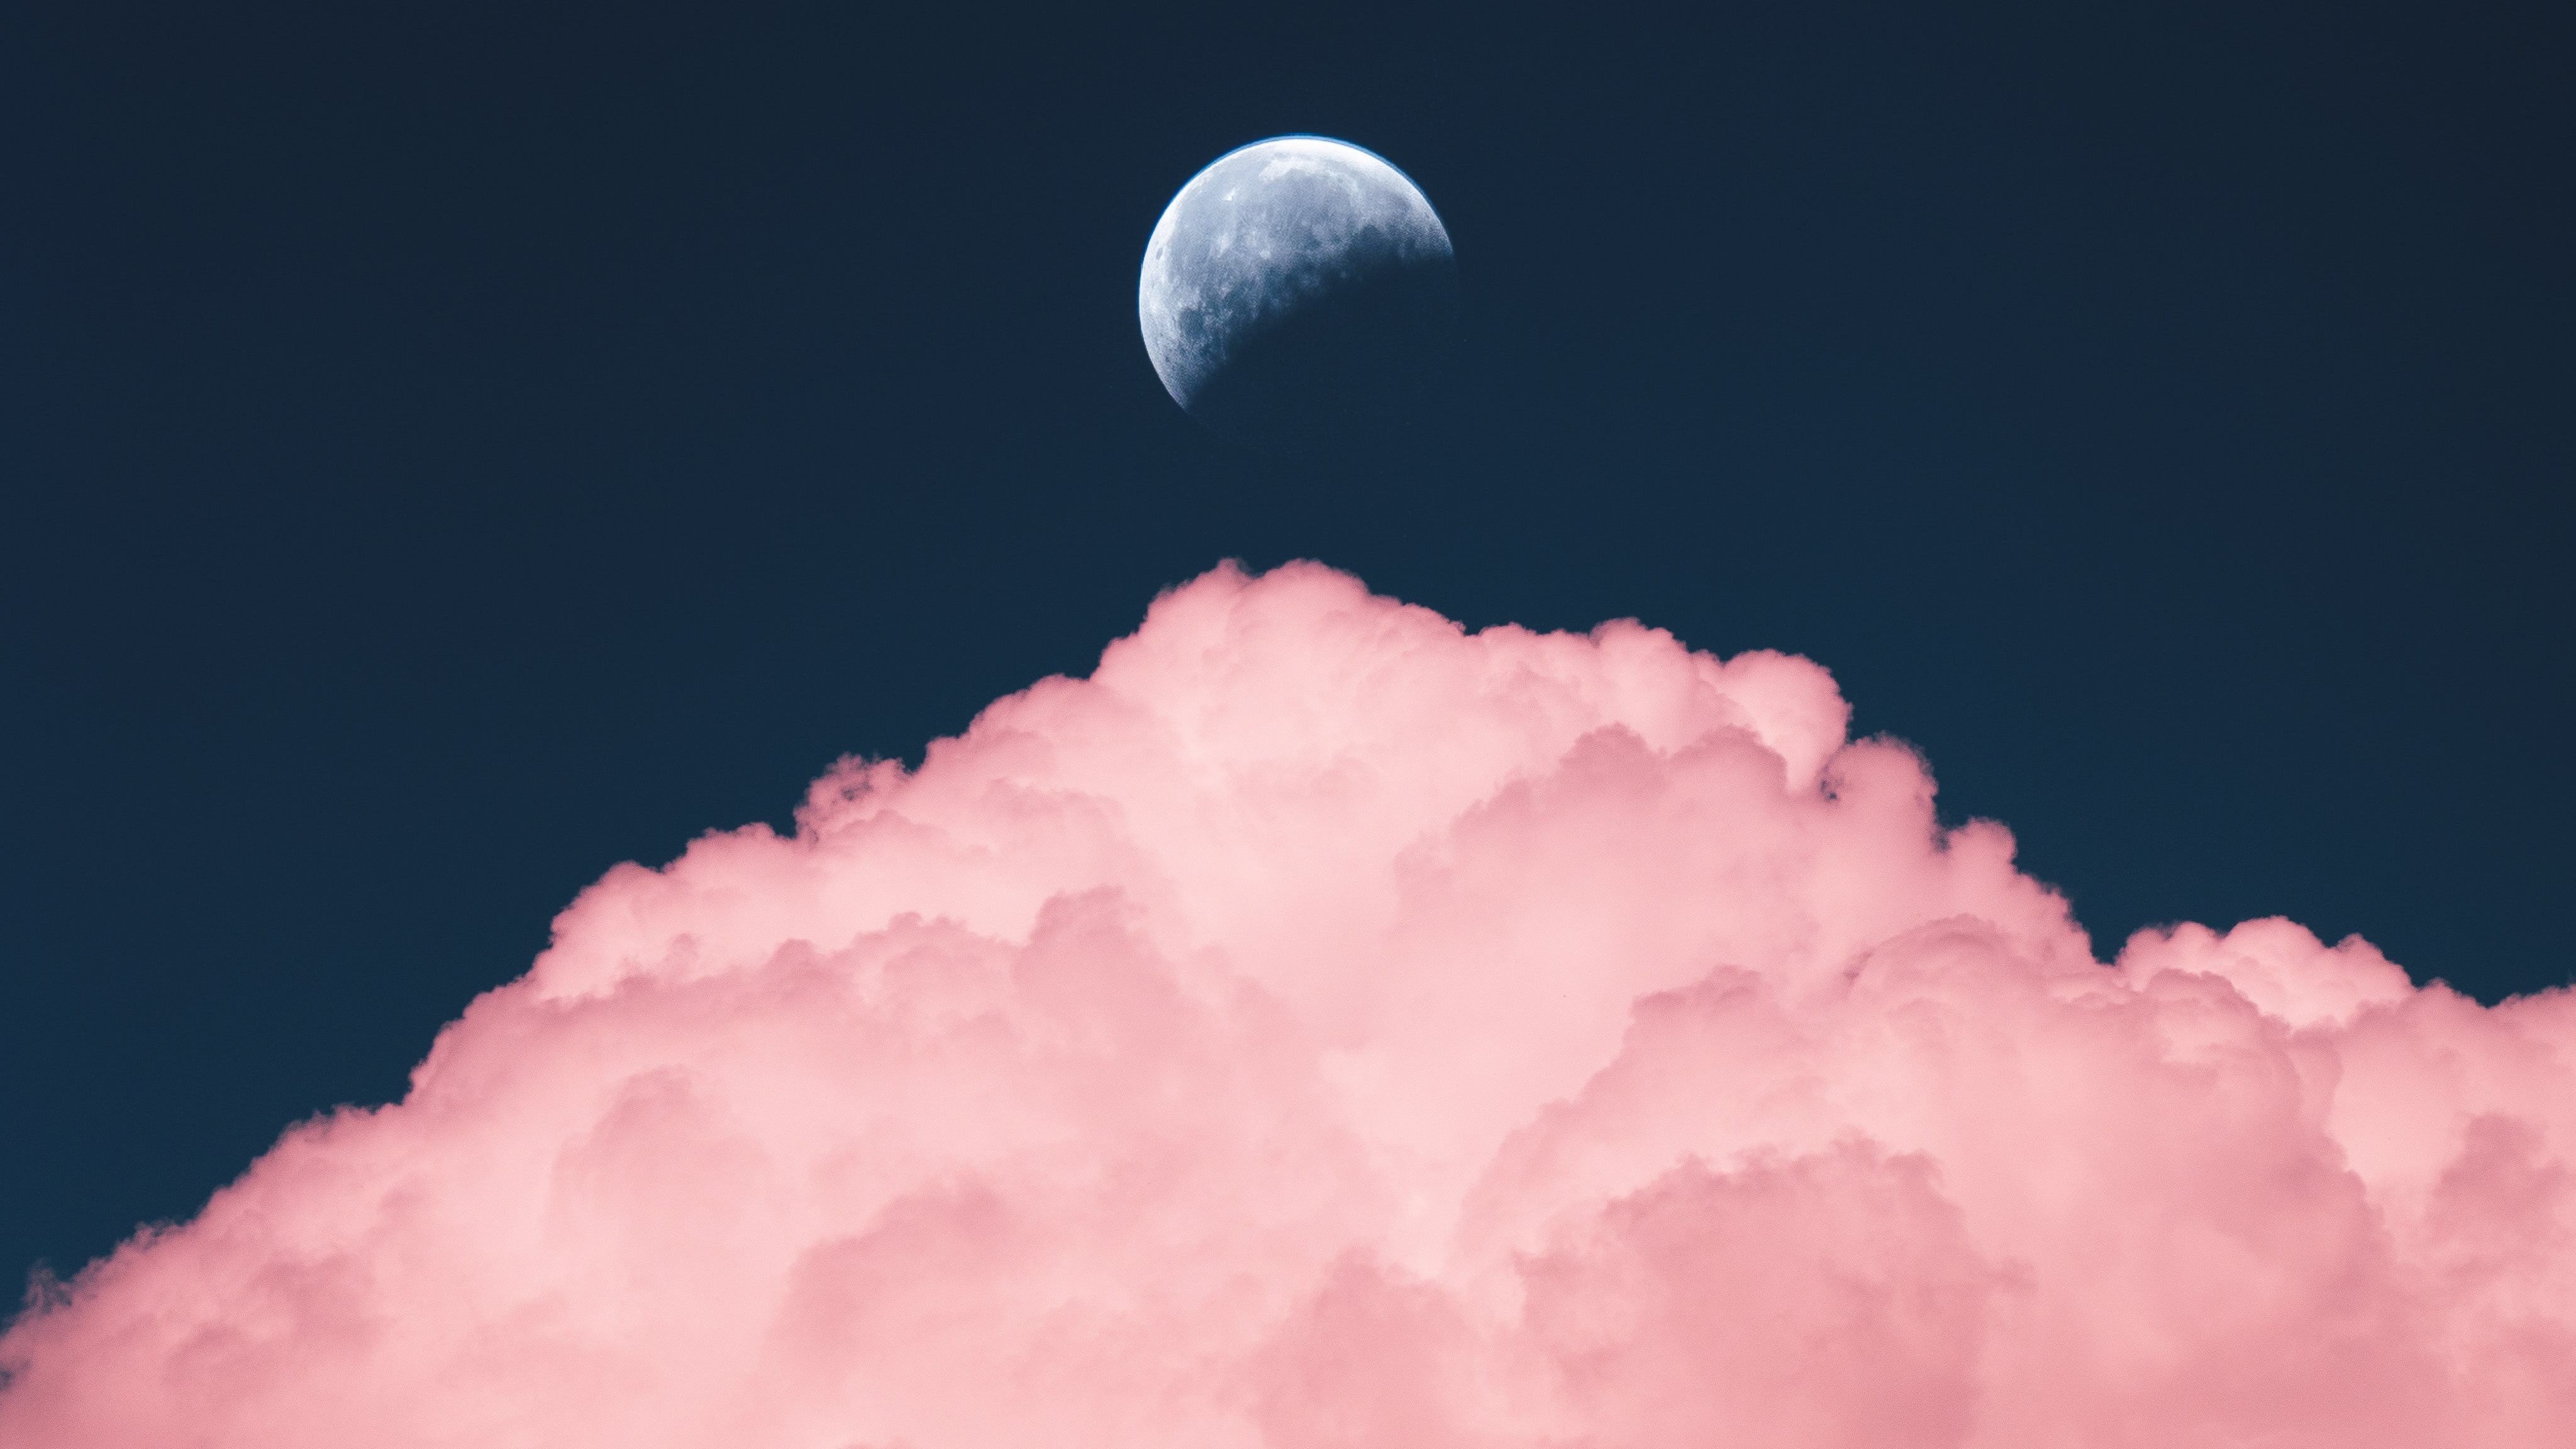 A pink cloud with the moon in it - IMac